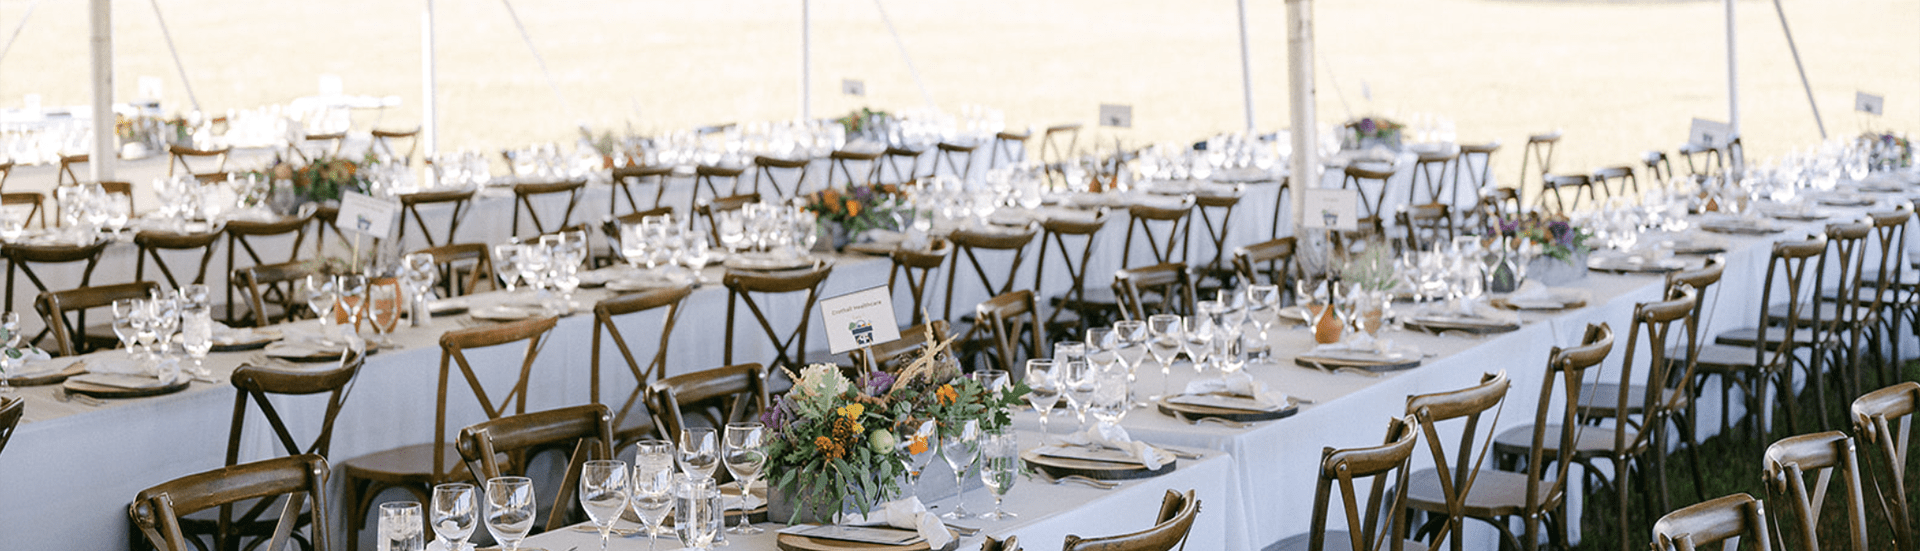 long rectangle tables under a white tent set up for a reception